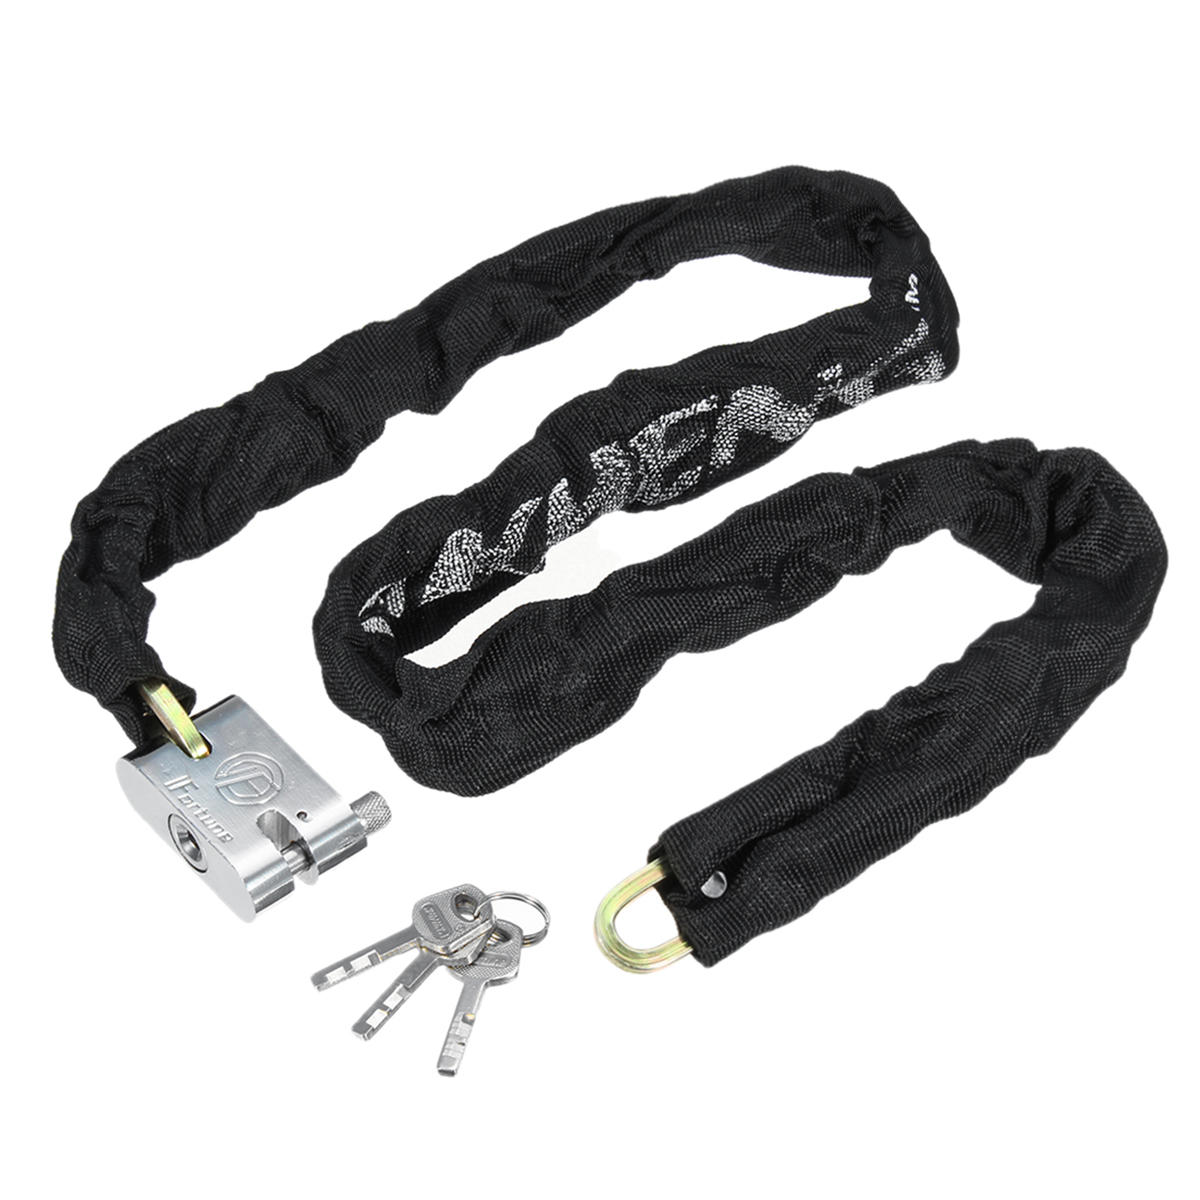 1.2M Anti Theft Chain Disc Lock Padlock For Motorcycle Bike Bicycle Scooter  ^